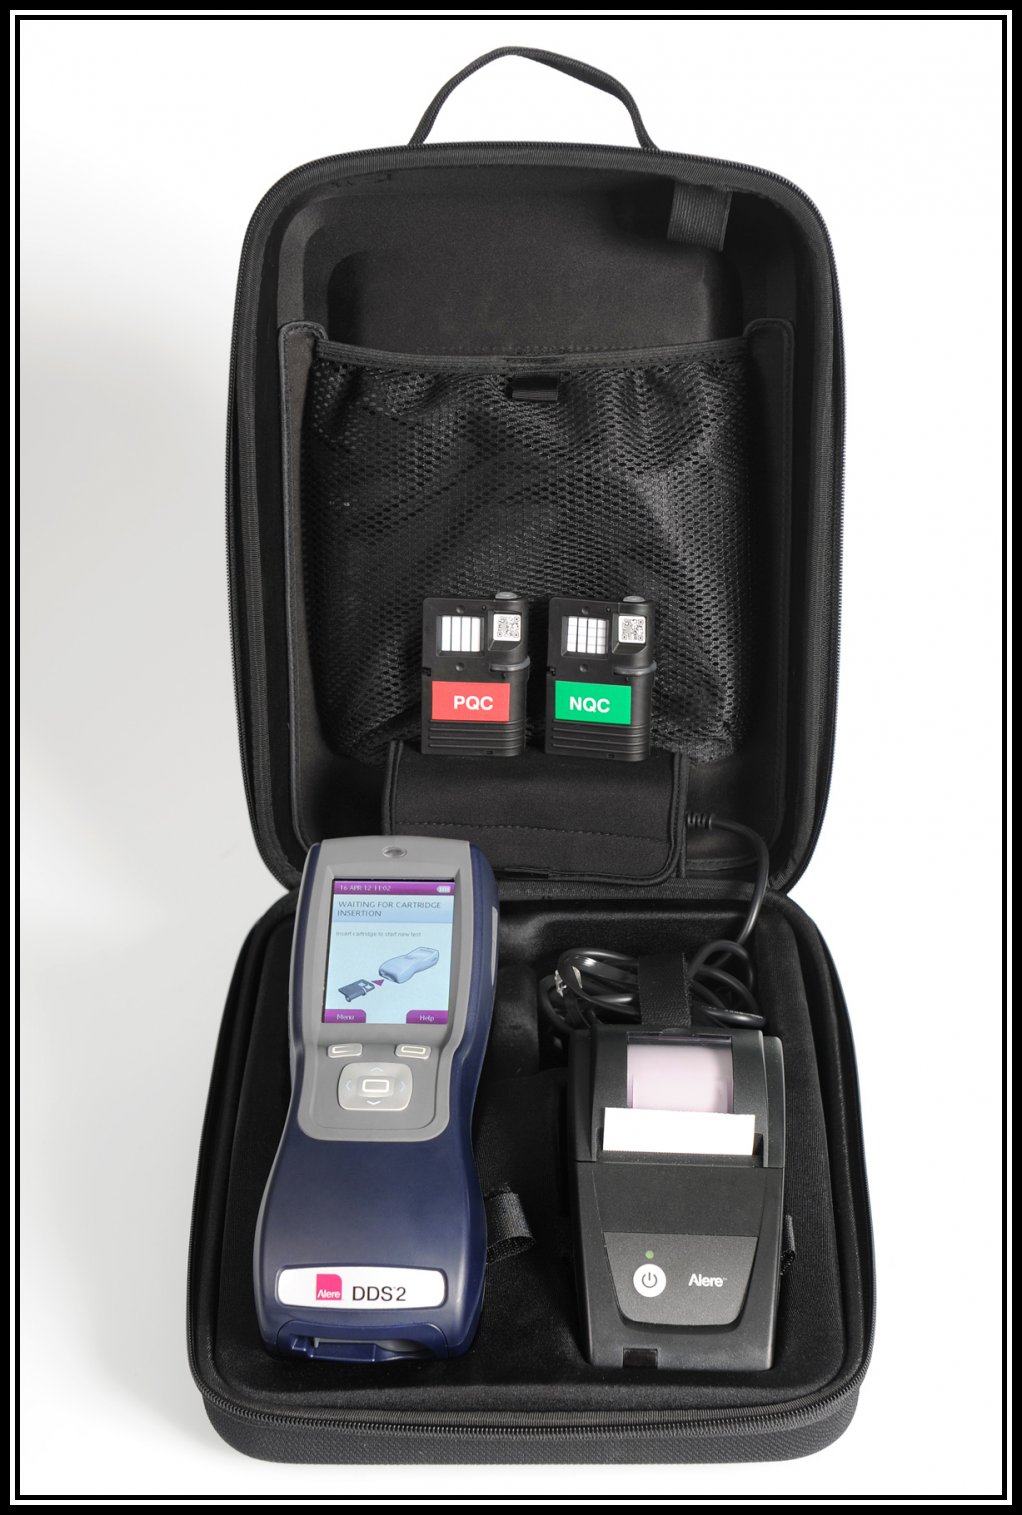 DDS2 FULL TESTING KIT
Saliva testing is faster and user friendly